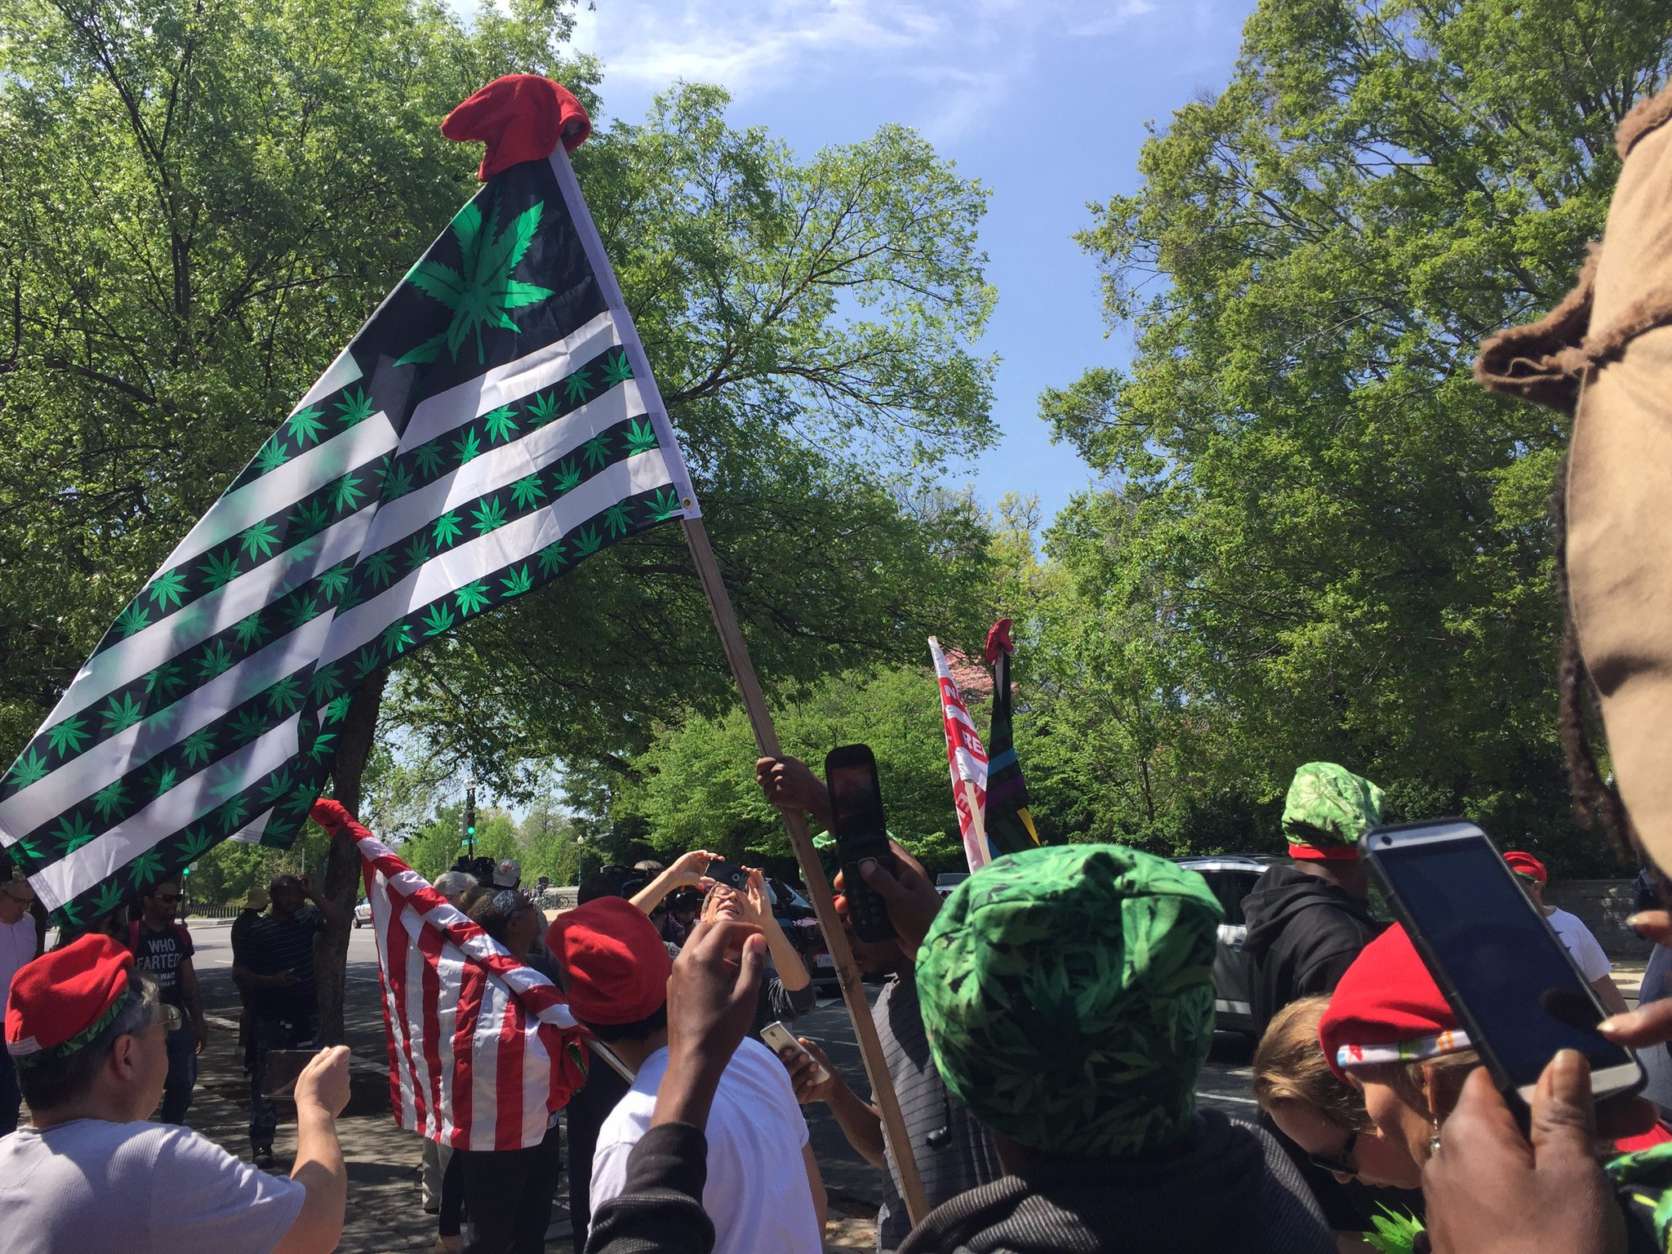 Seven activists were arrested by the Capitol Police after giving away pot in D.C. on April 20, 2017. (WTOP/Kristi King)